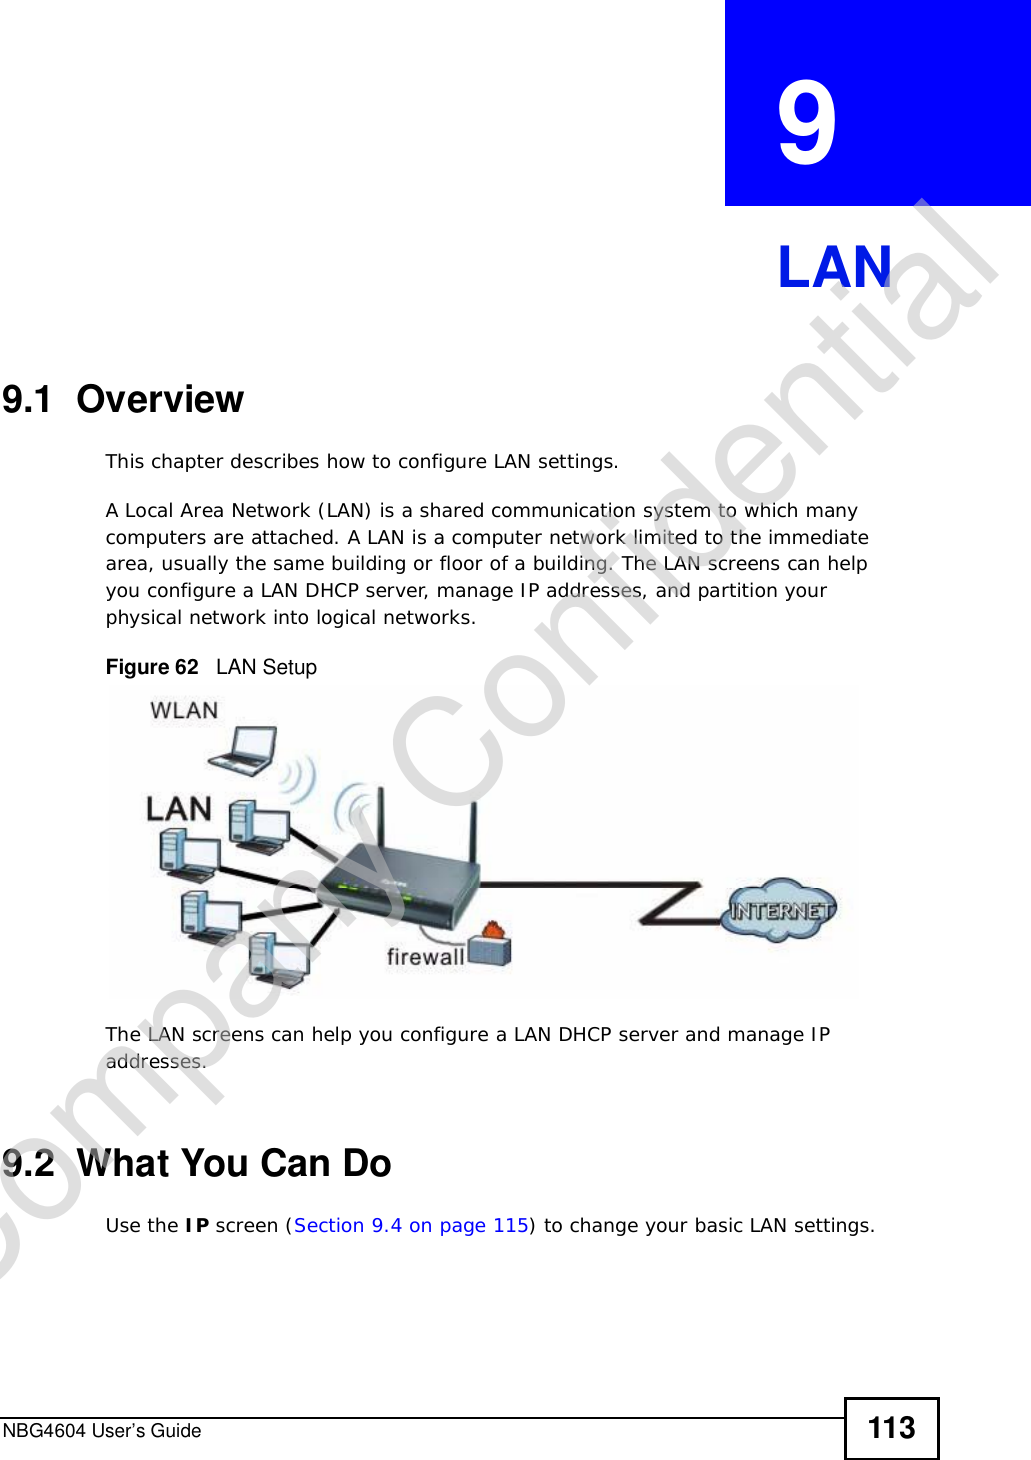 NBG4604 User’s Guide 113CHAPTER  9 LAN9.1  OverviewThis chapter describes how to configure LAN settings.A Local Area Network (LAN) is a shared communication system to which many computers are attached. A LAN is a computer network limited to the immediate area, usually the same building or floor of a building. The LAN screens can help you configure a LAN DHCP server, manage IP addresses, and partition your physical network into logical networks.Figure 62   LAN SetupThe LAN screens can help you configure a LAN DHCP server and manage IP addresses.9.2  What You Can DoUse the IP screen (Section 9.4 on page 115) to change your basic LAN settings.Company Confidential